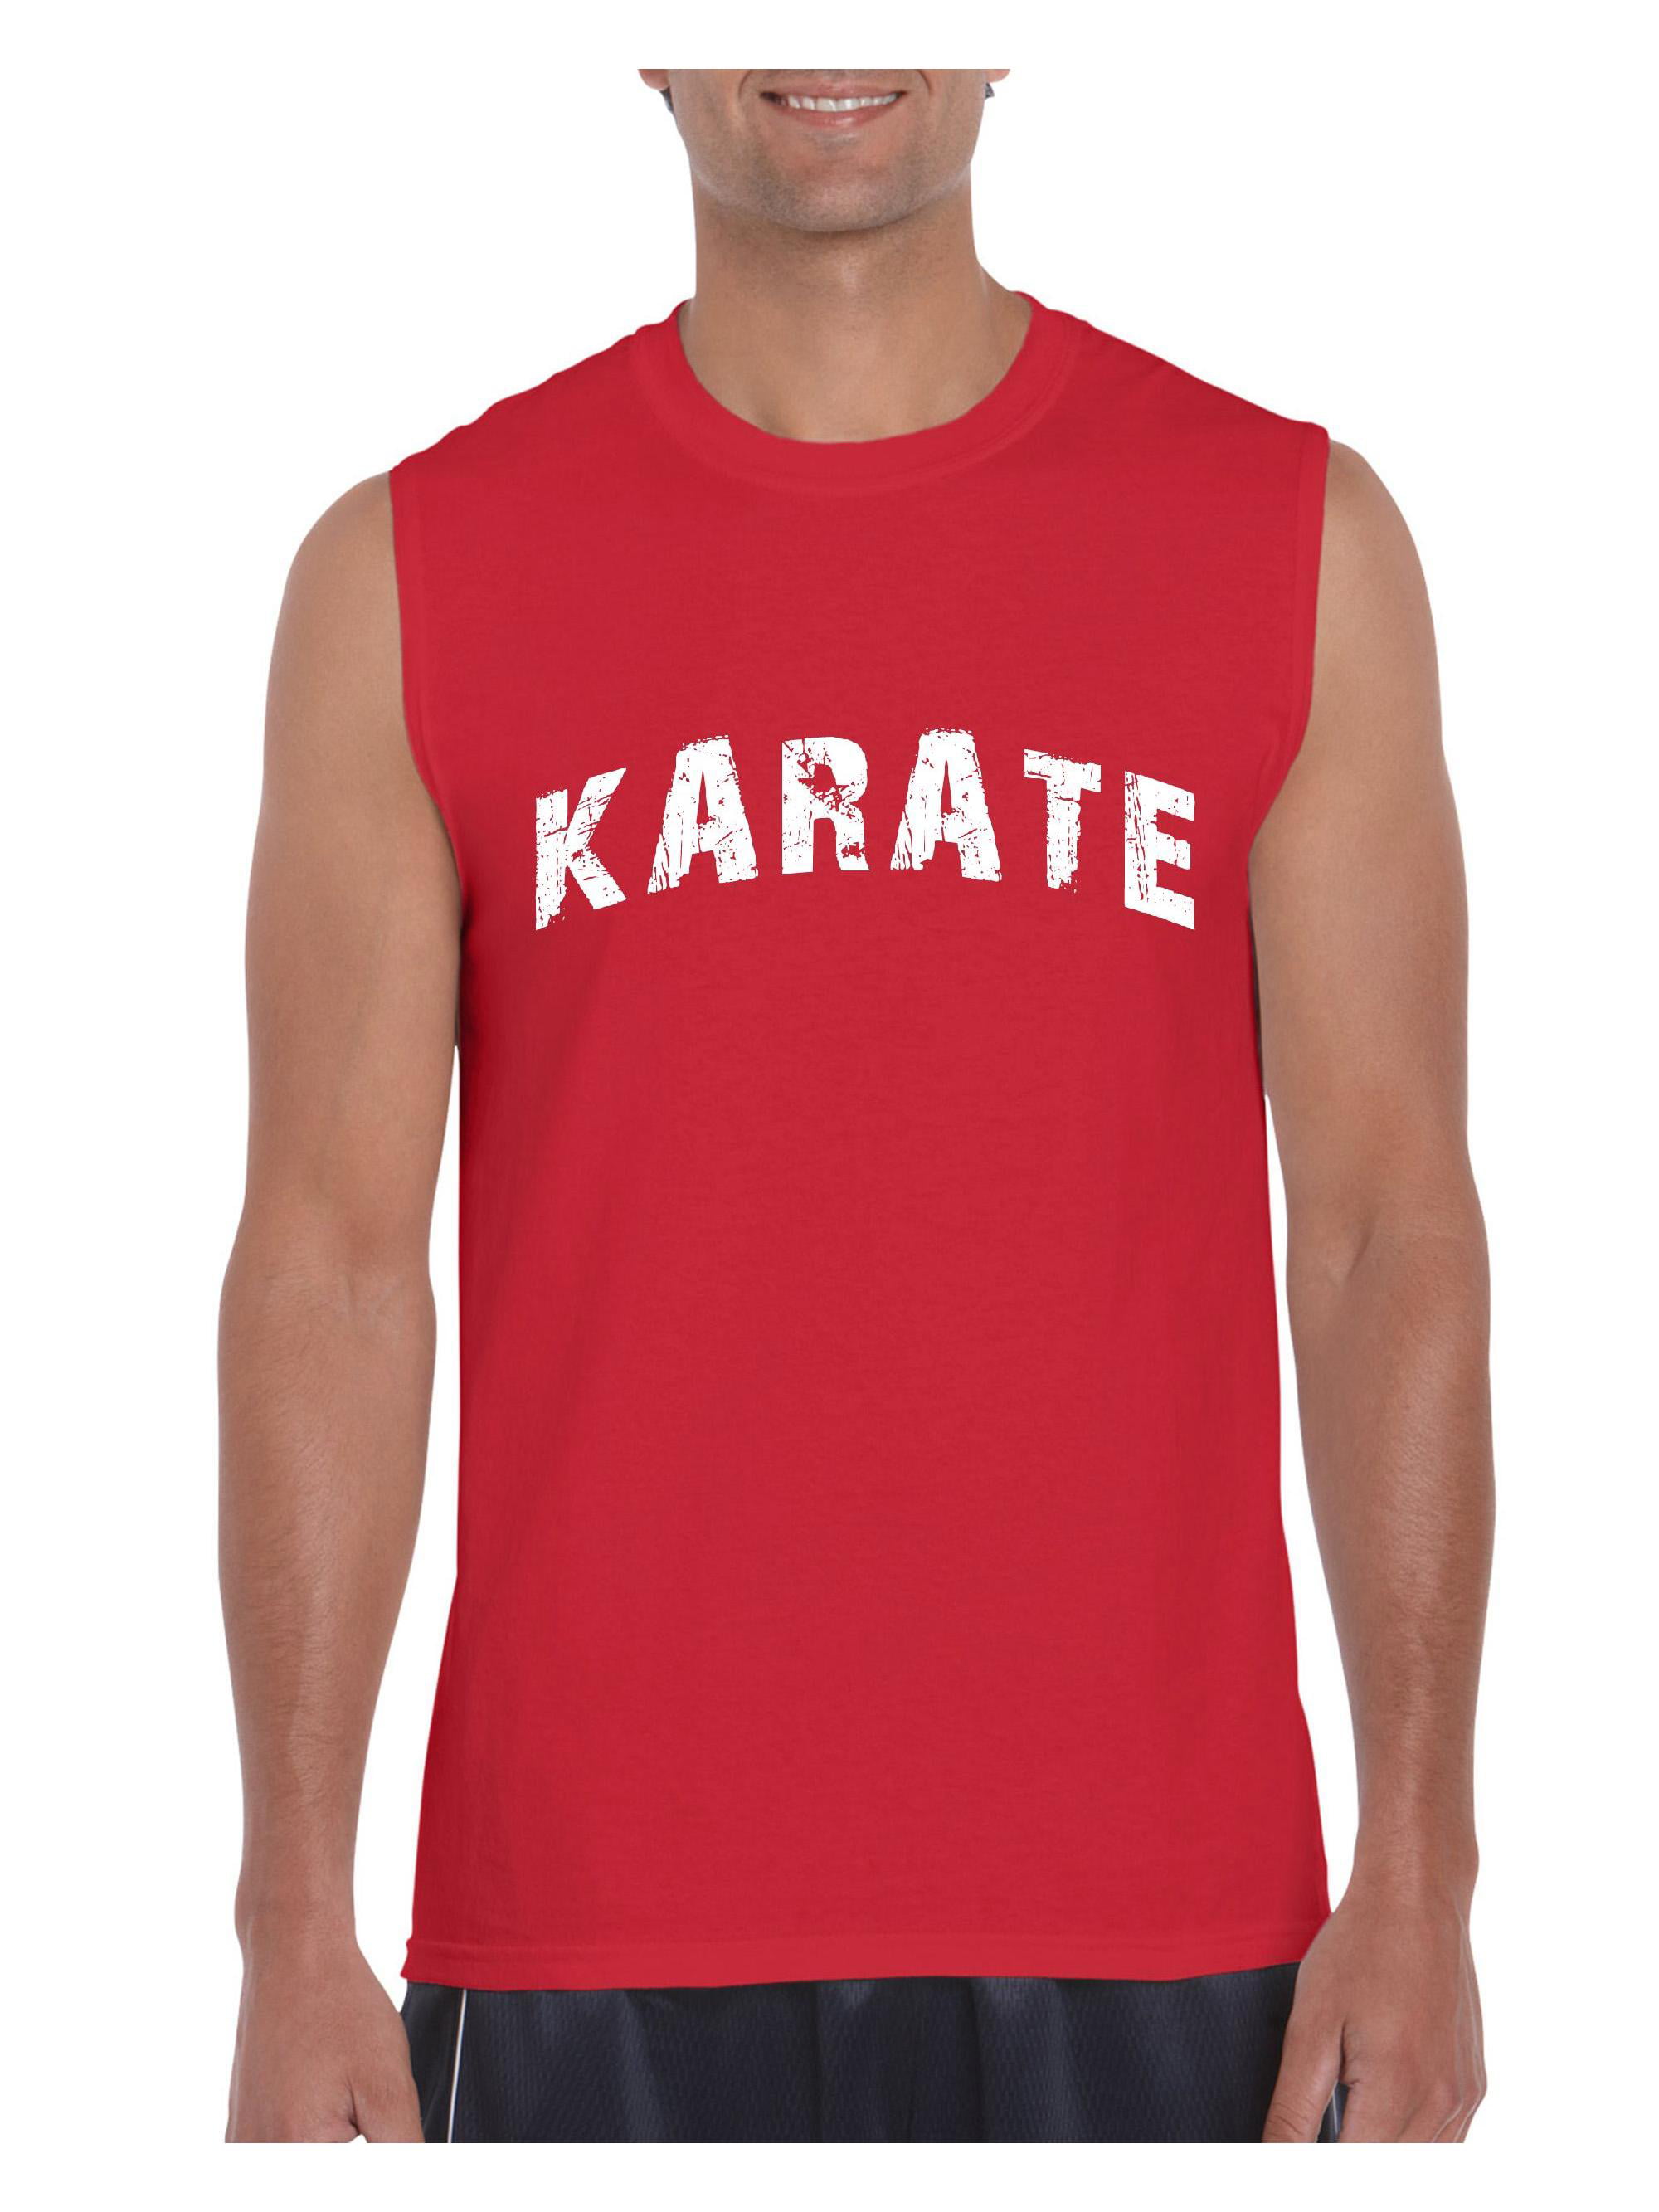 Mens Vintage Style Karate Tank Top Loose Fit 100% Cotton Waistcoat for Mens 